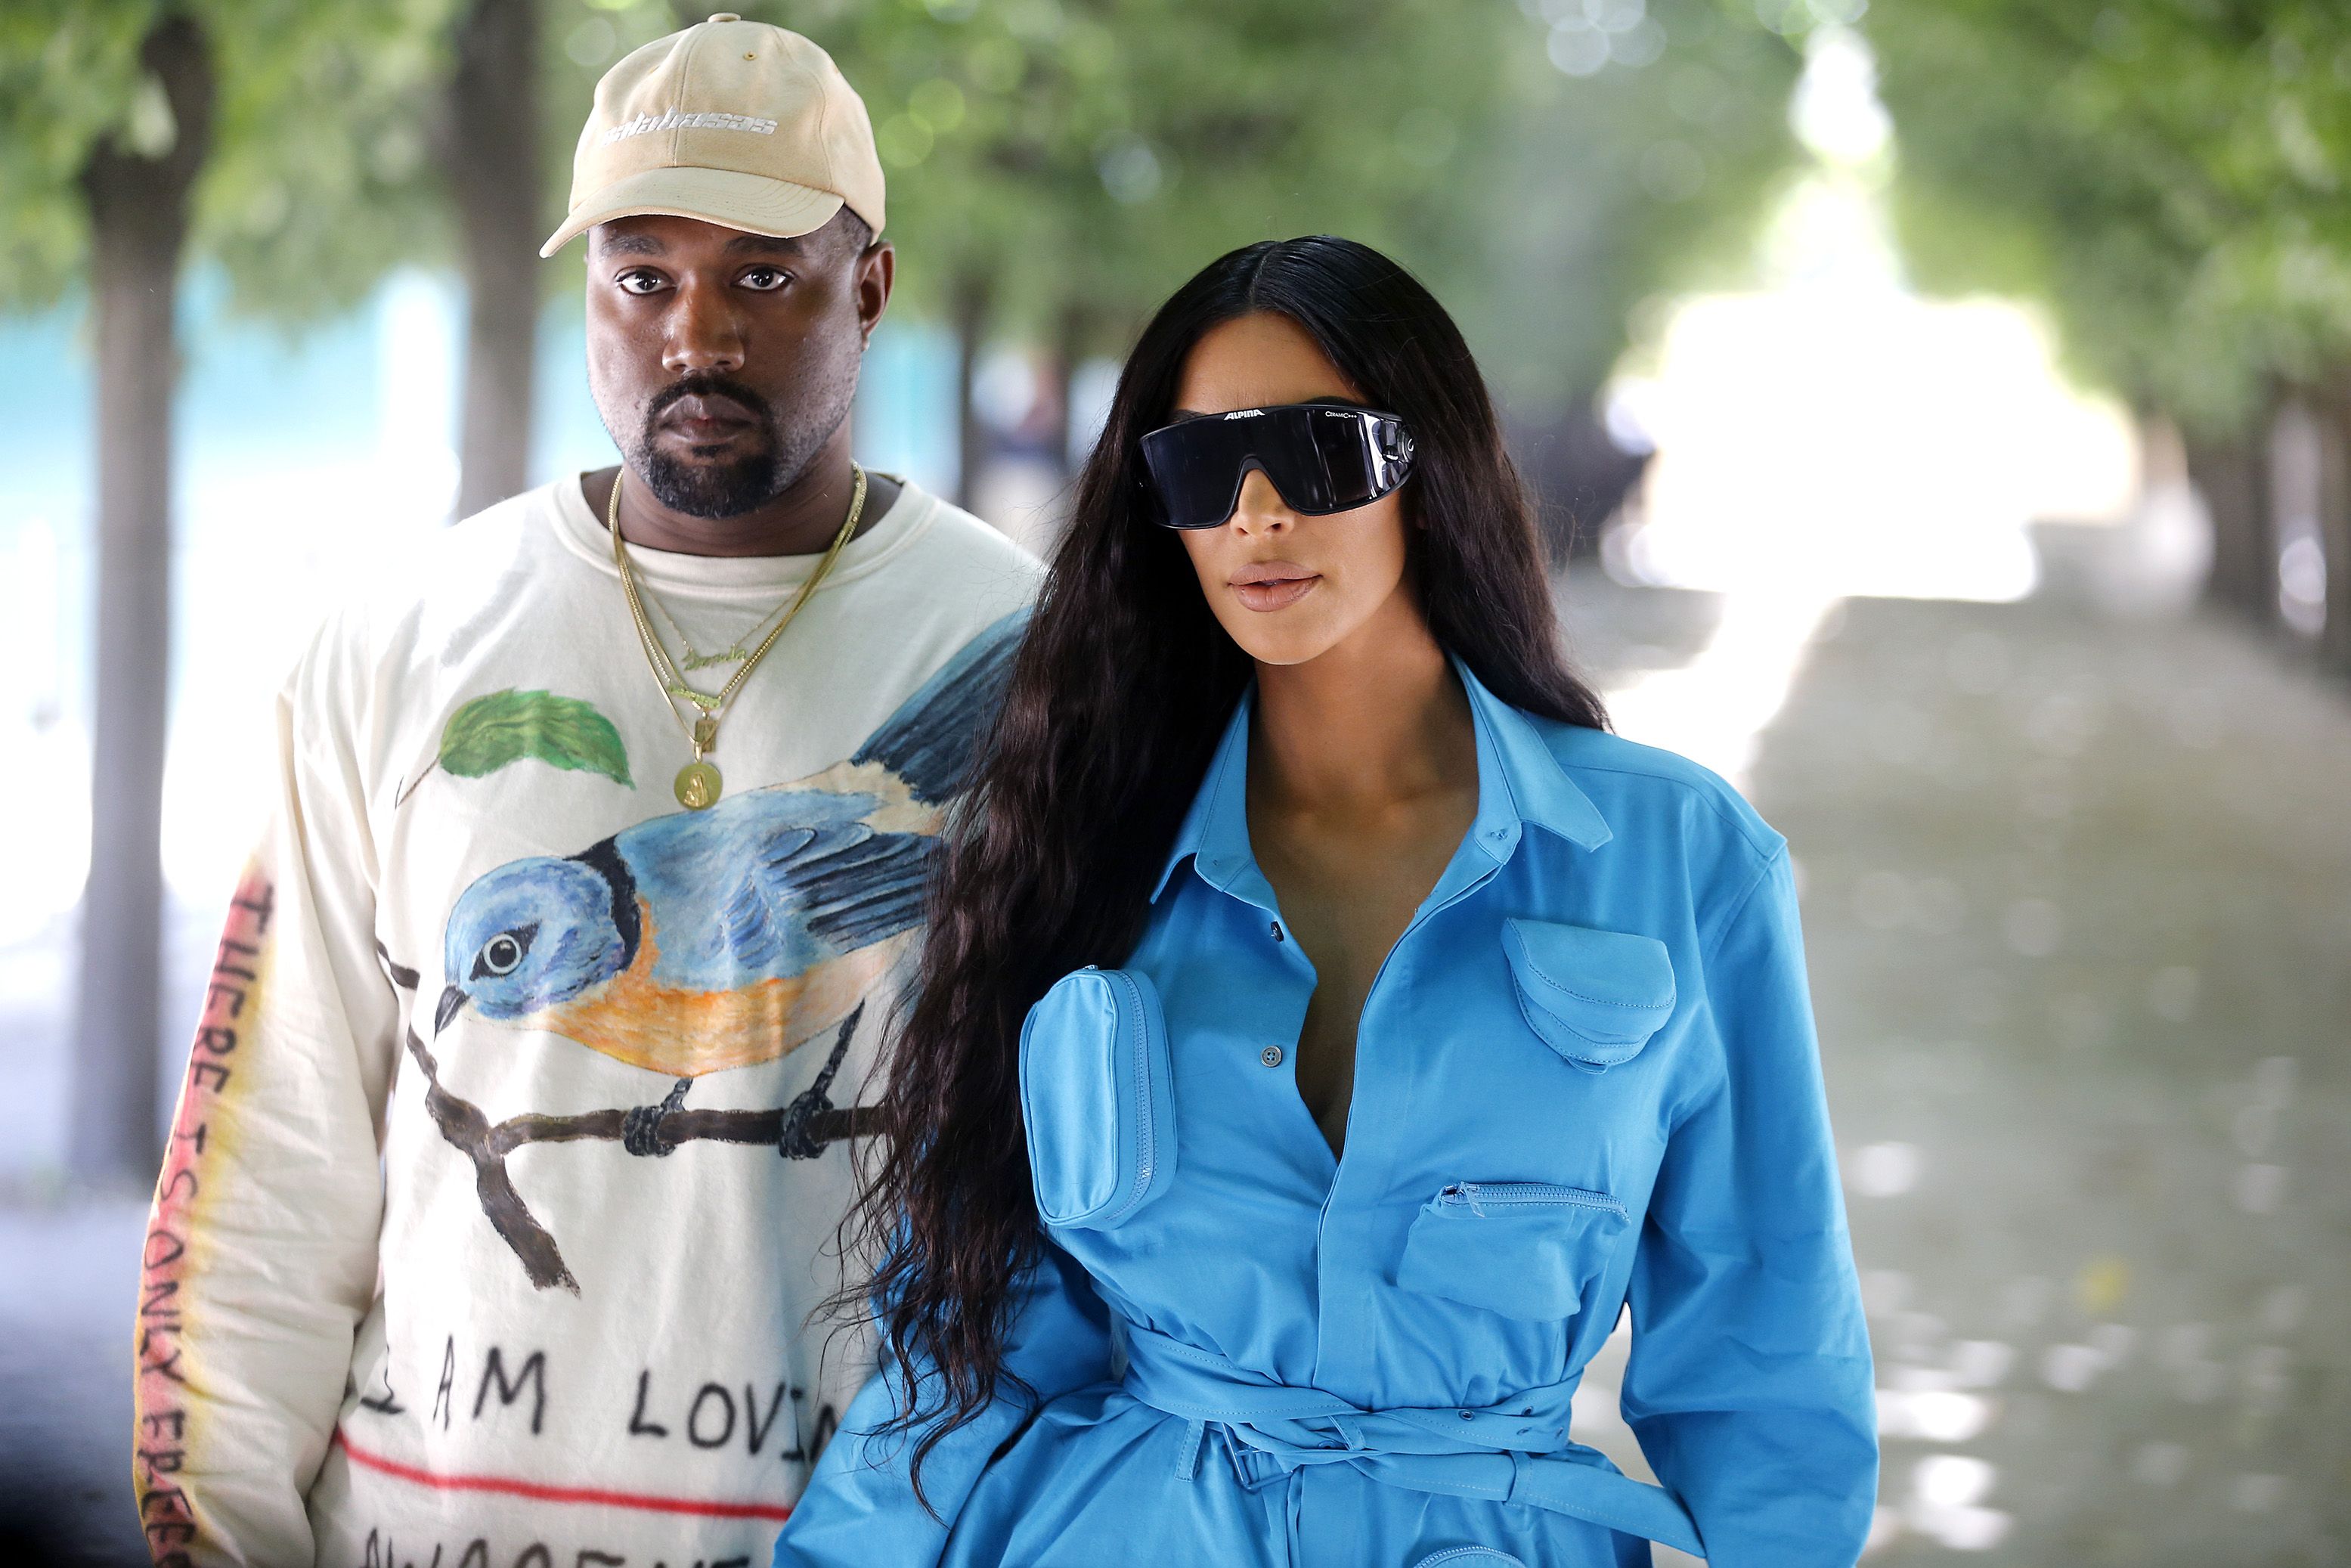 Kim K and Kanye to design together for Louis Vuitton?